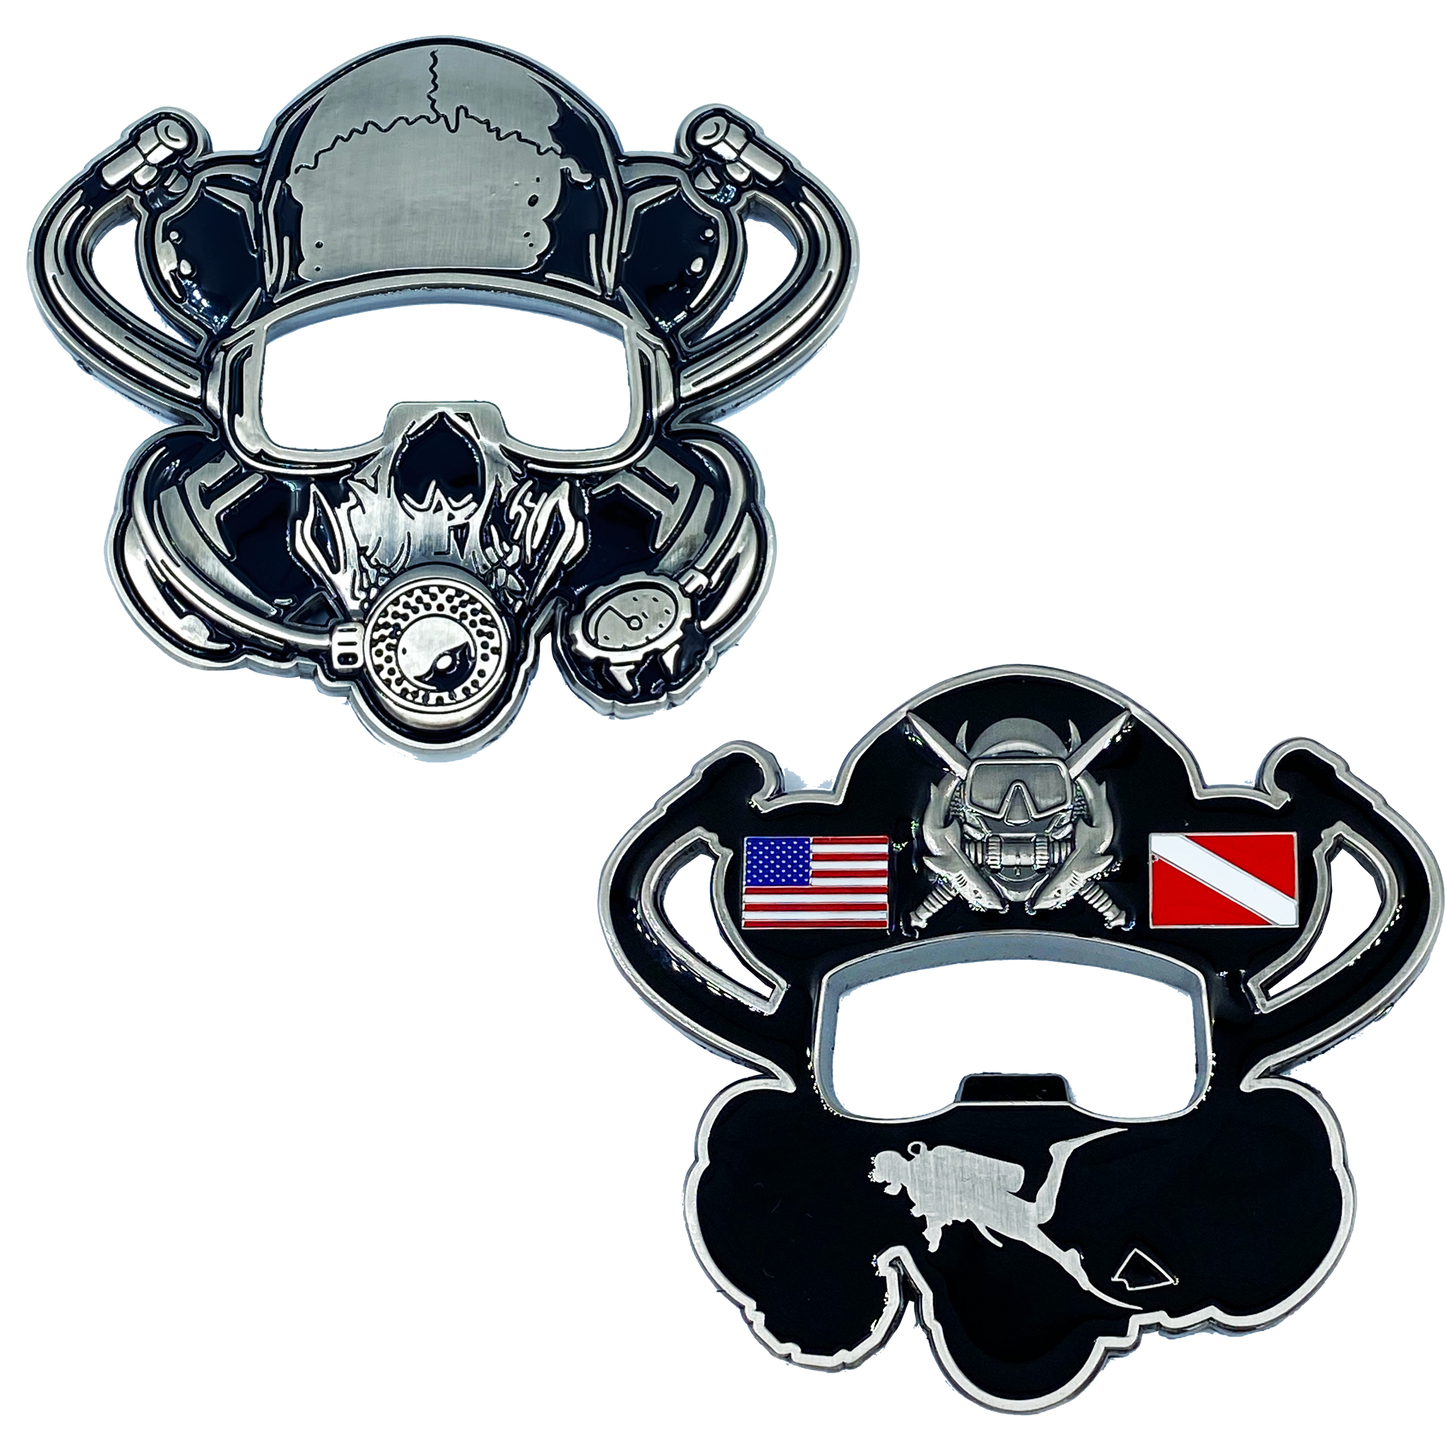 DL11-16 Scuba Flag Rescue Diver Skull Challenge Coin Military Police Coast Guard Navy US USA